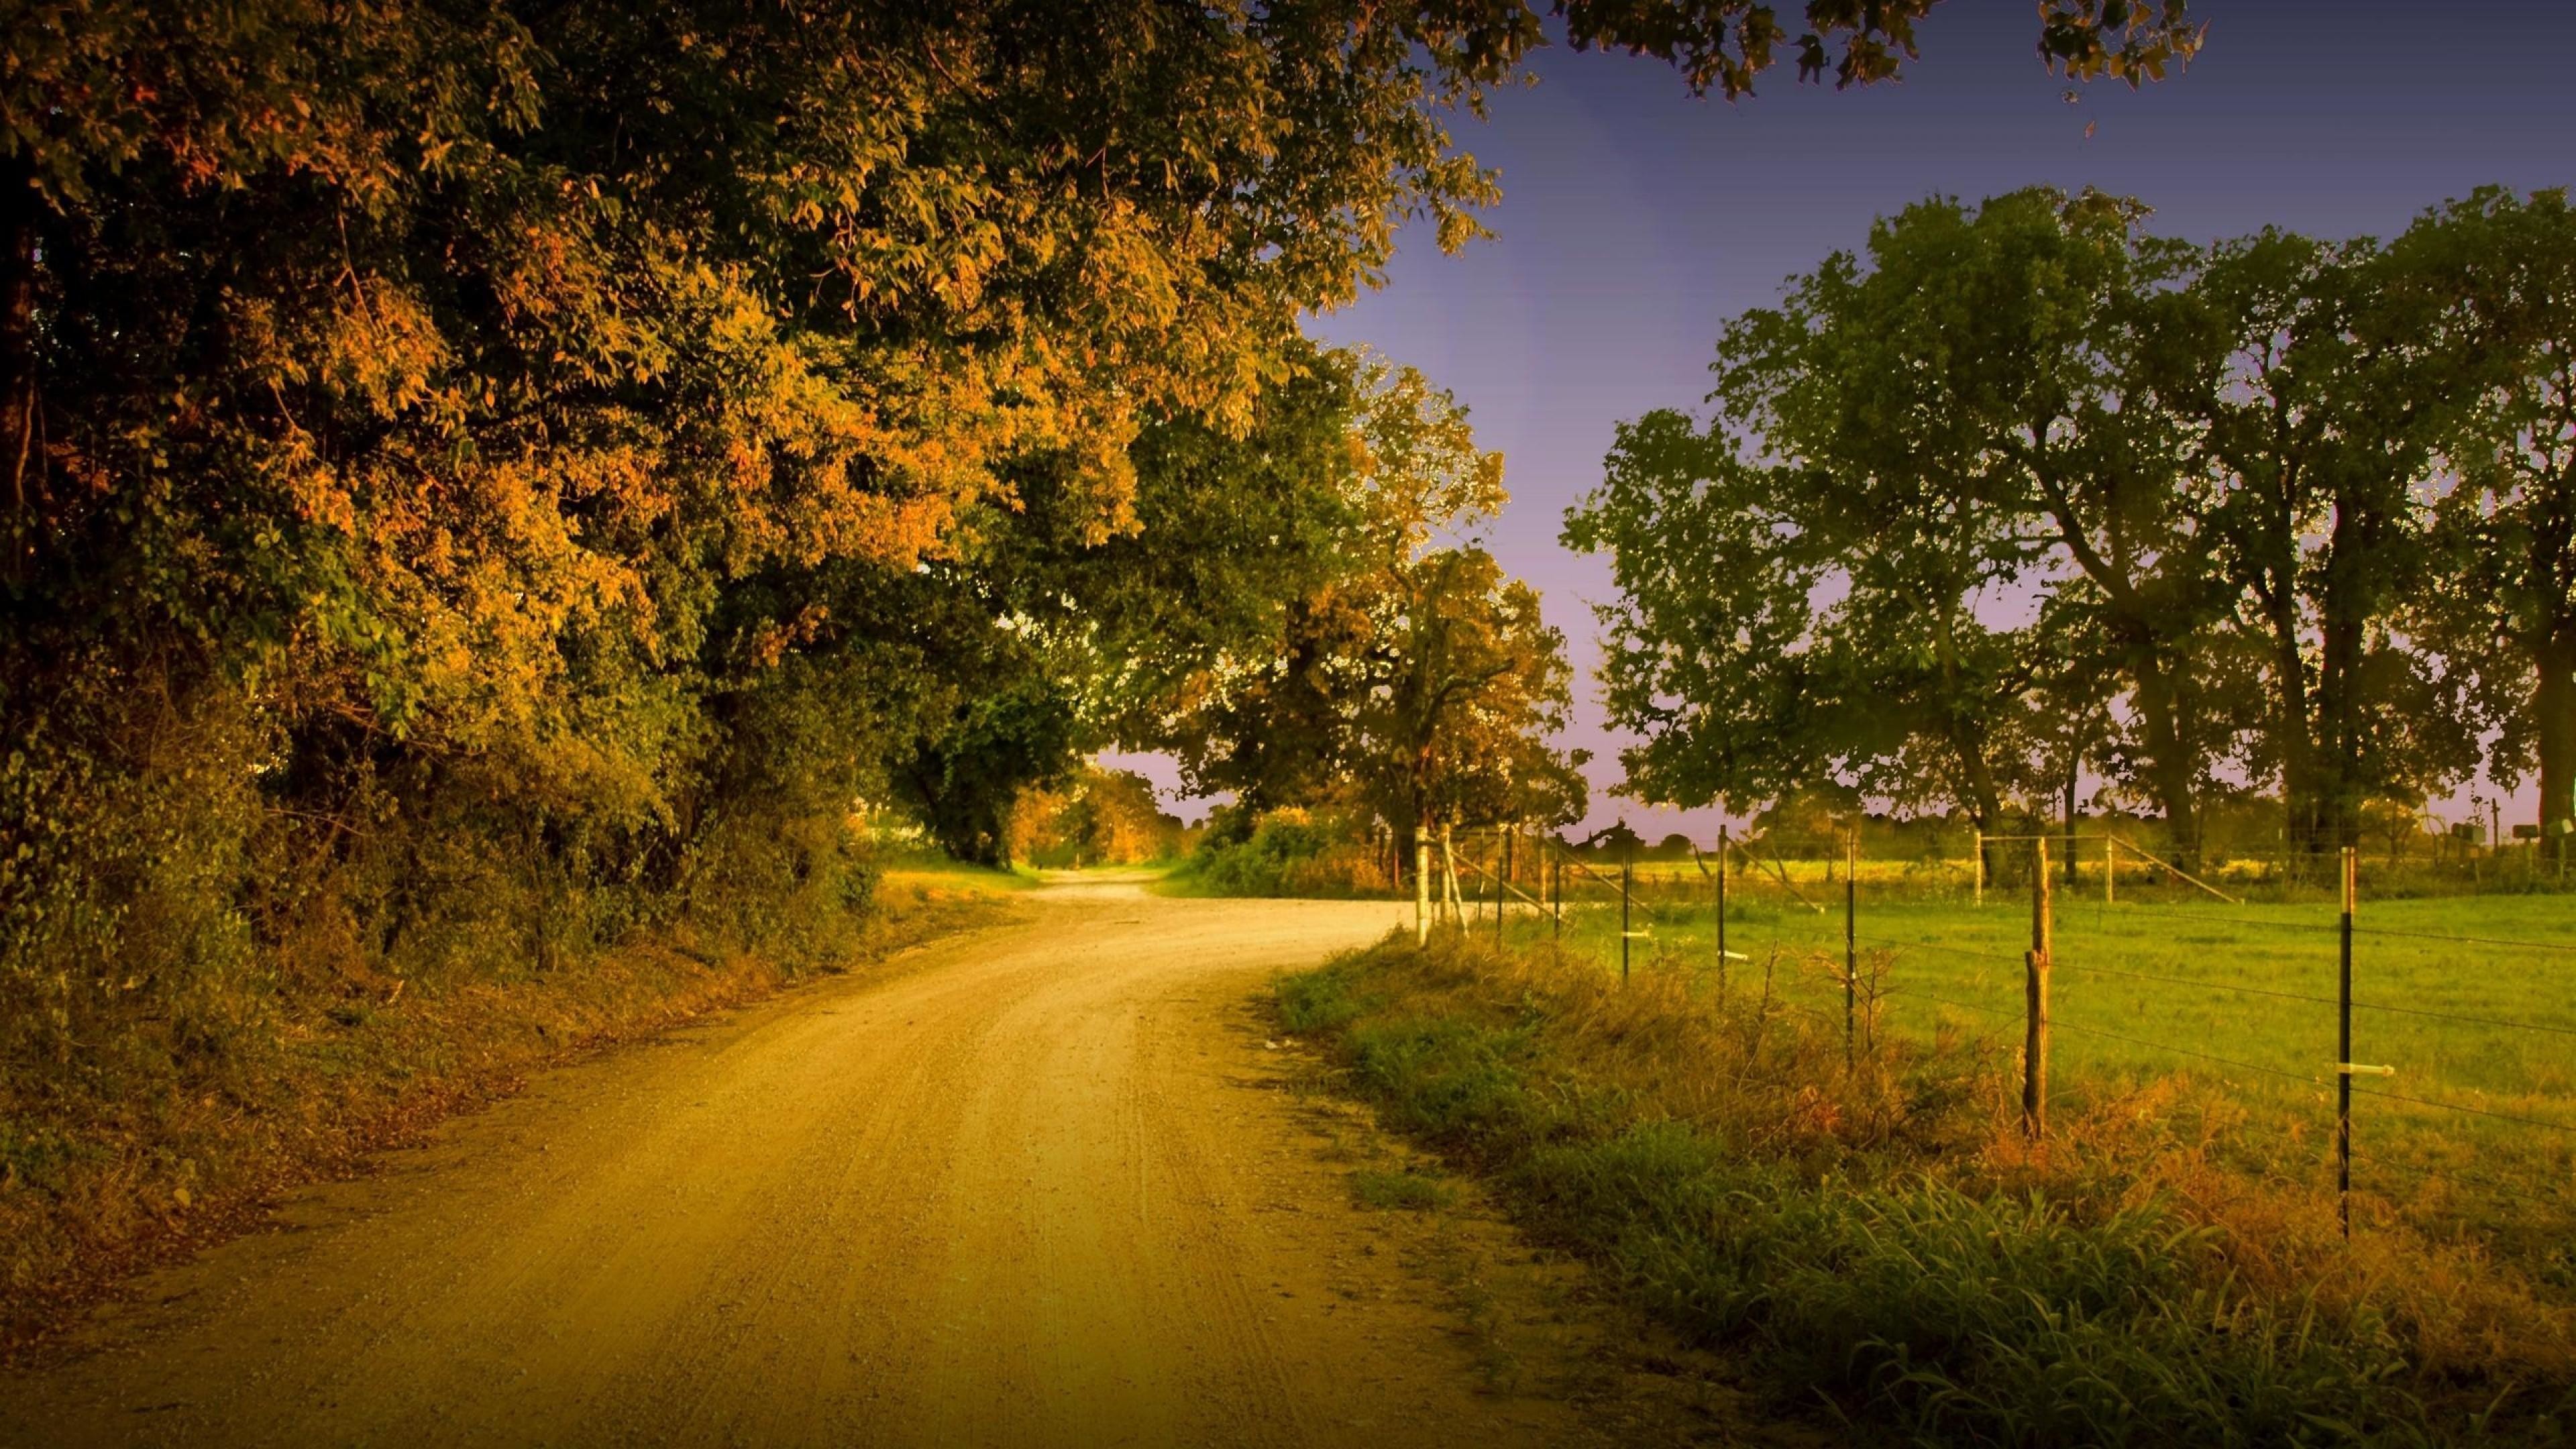 3840x2160  country road wallpapers full hd Â· Download Â· 2560x1600 Timeline